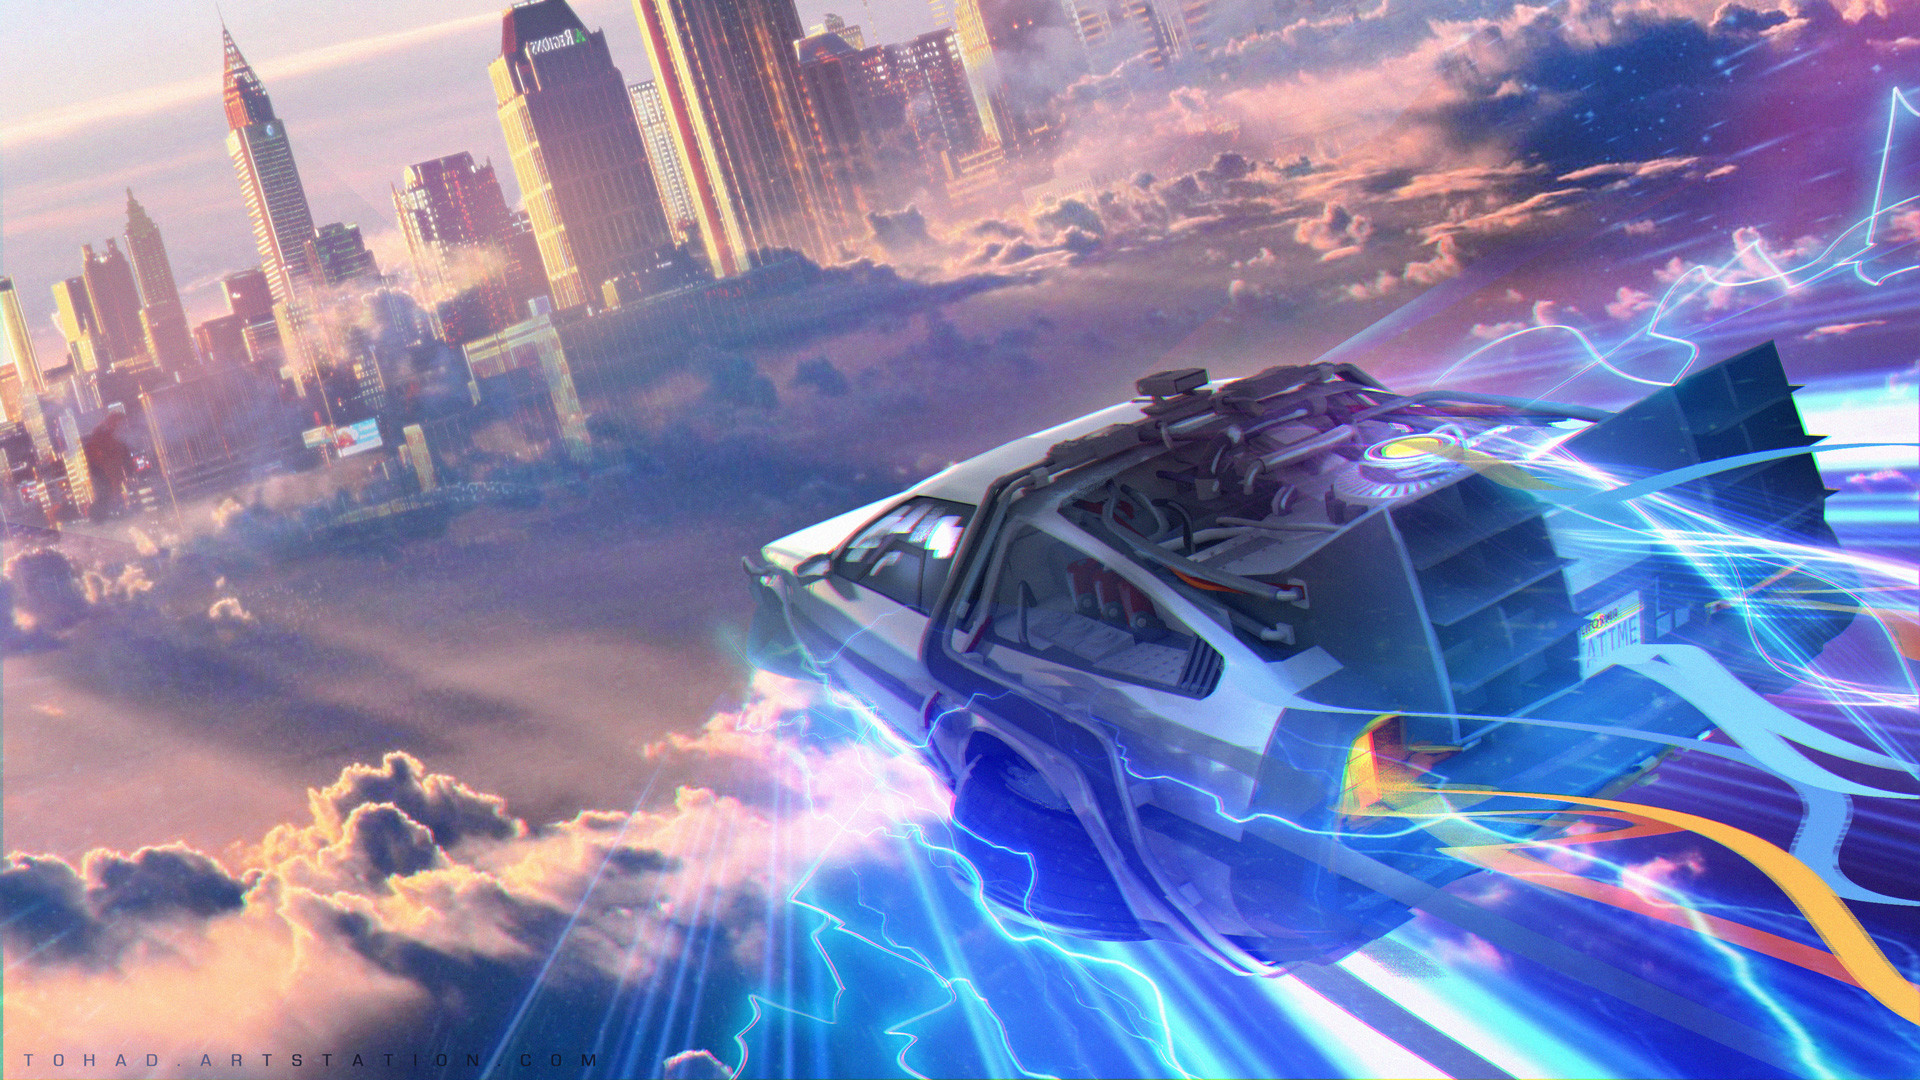 The Time Machine Back To The Future DMC DeLorean Flying Artwork Cityscape Science Fiction Cyan Viole 1920x1080